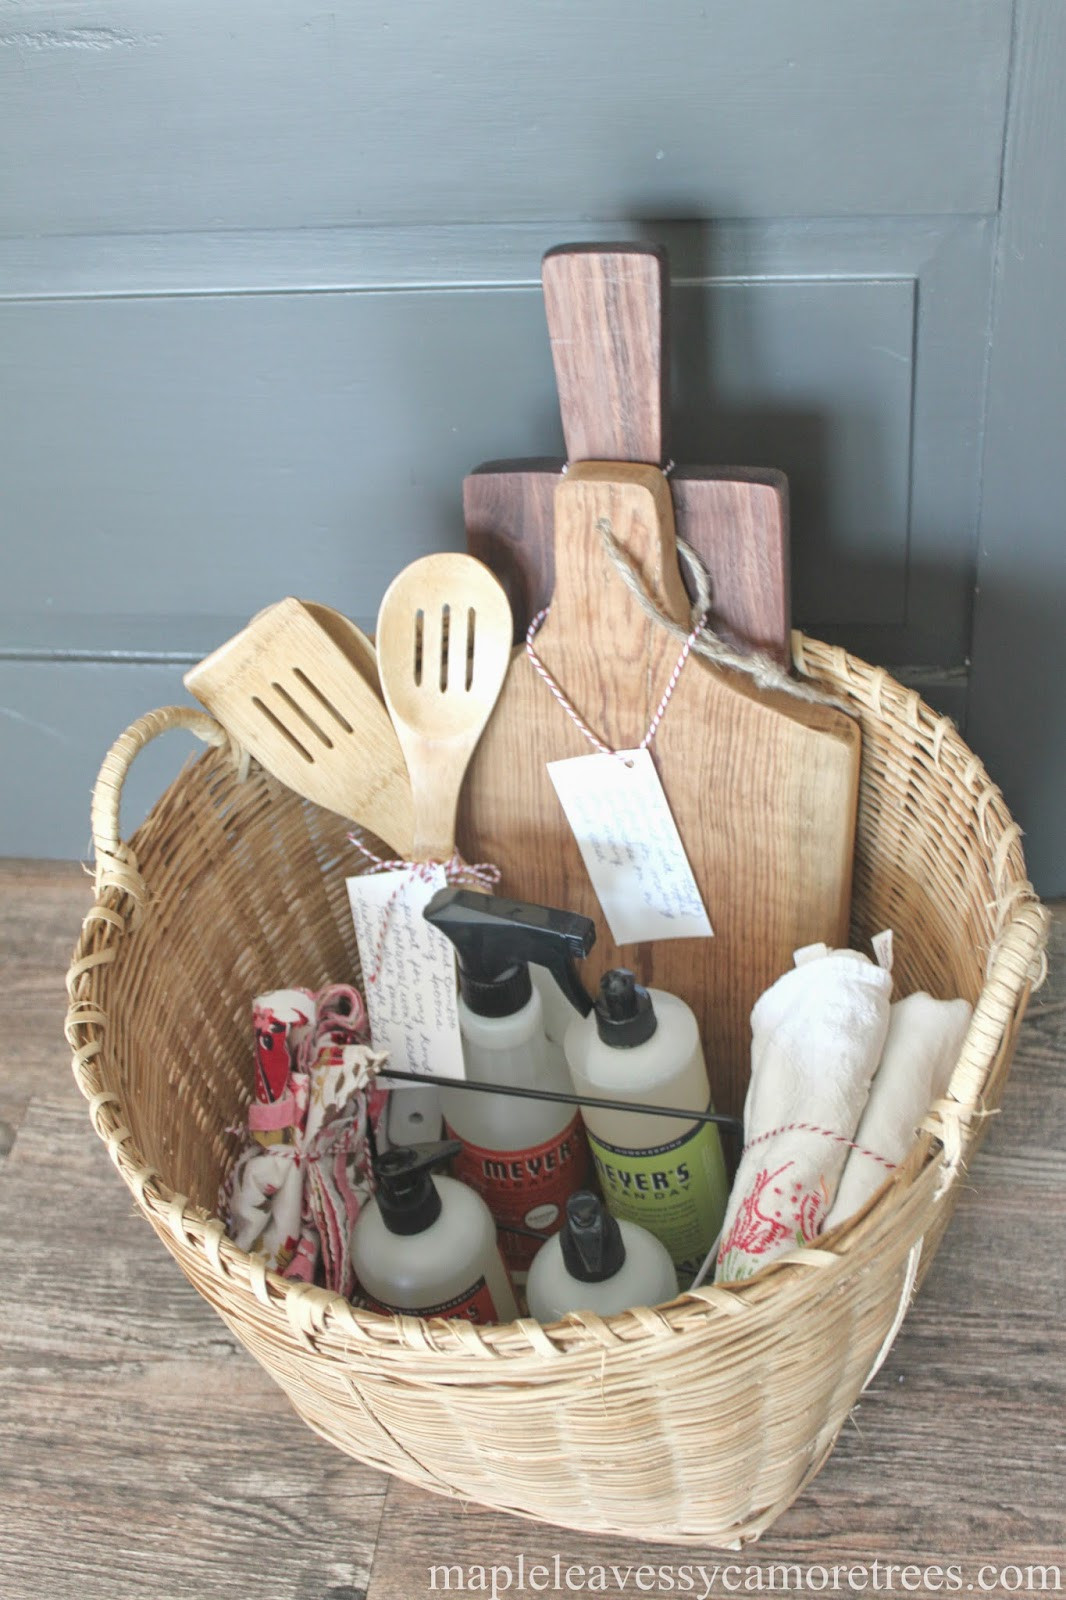 Simple Wedding Gift Ideas
 Simple Gifting 10 Mrs Meyer s Gift Basket Ideas